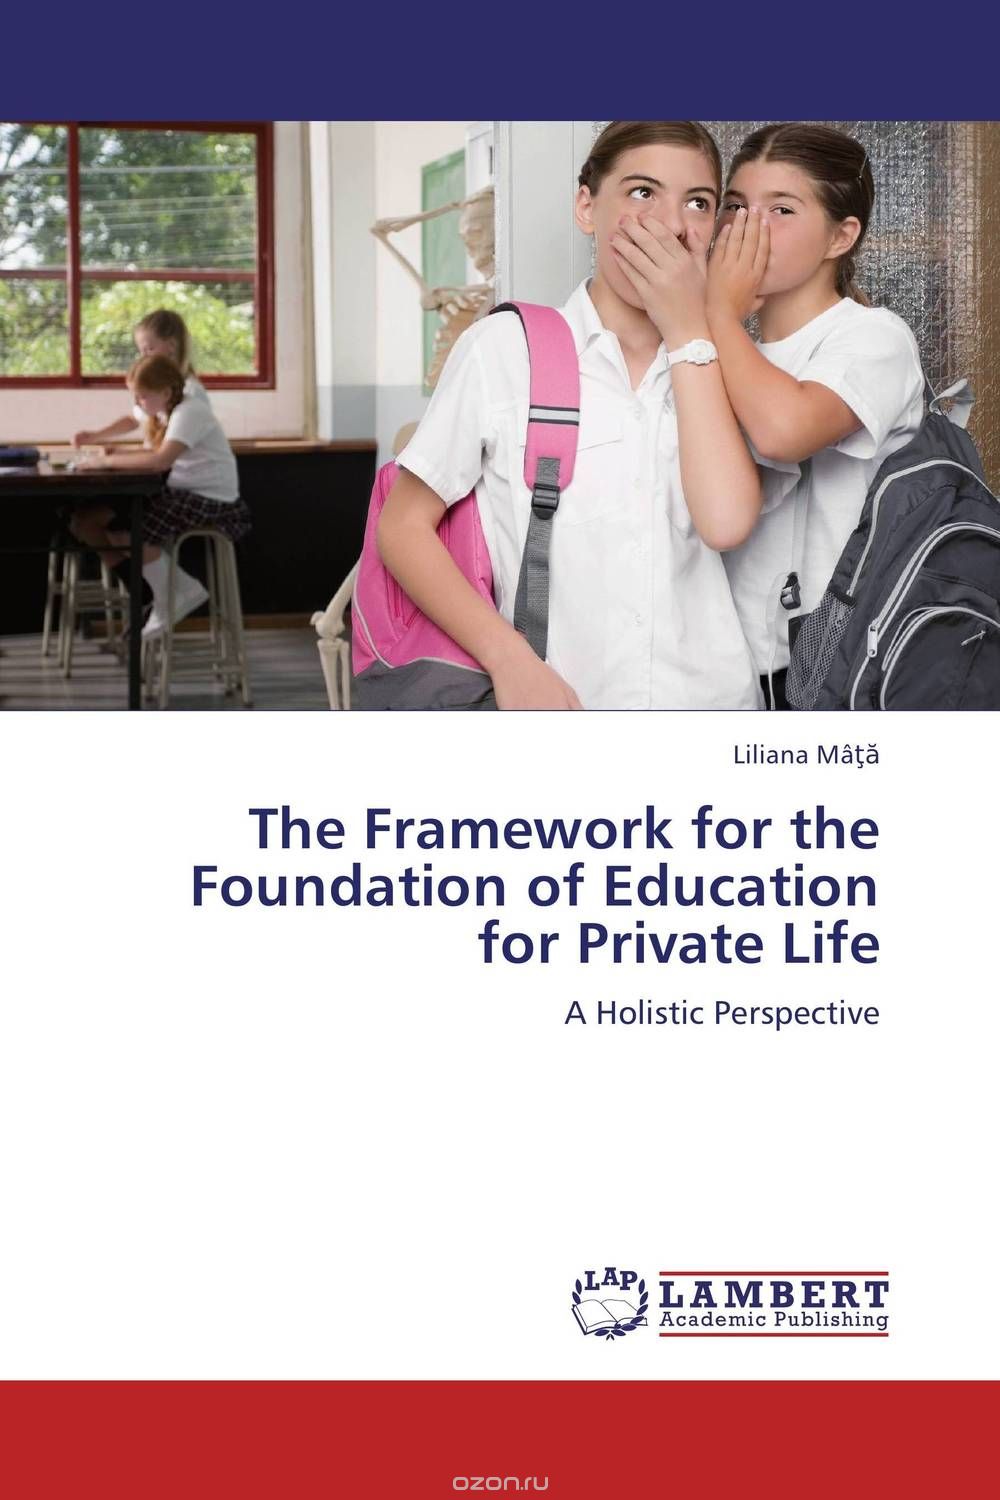 Скачать книгу "The Framework for the Foundation of Education for Private Life"